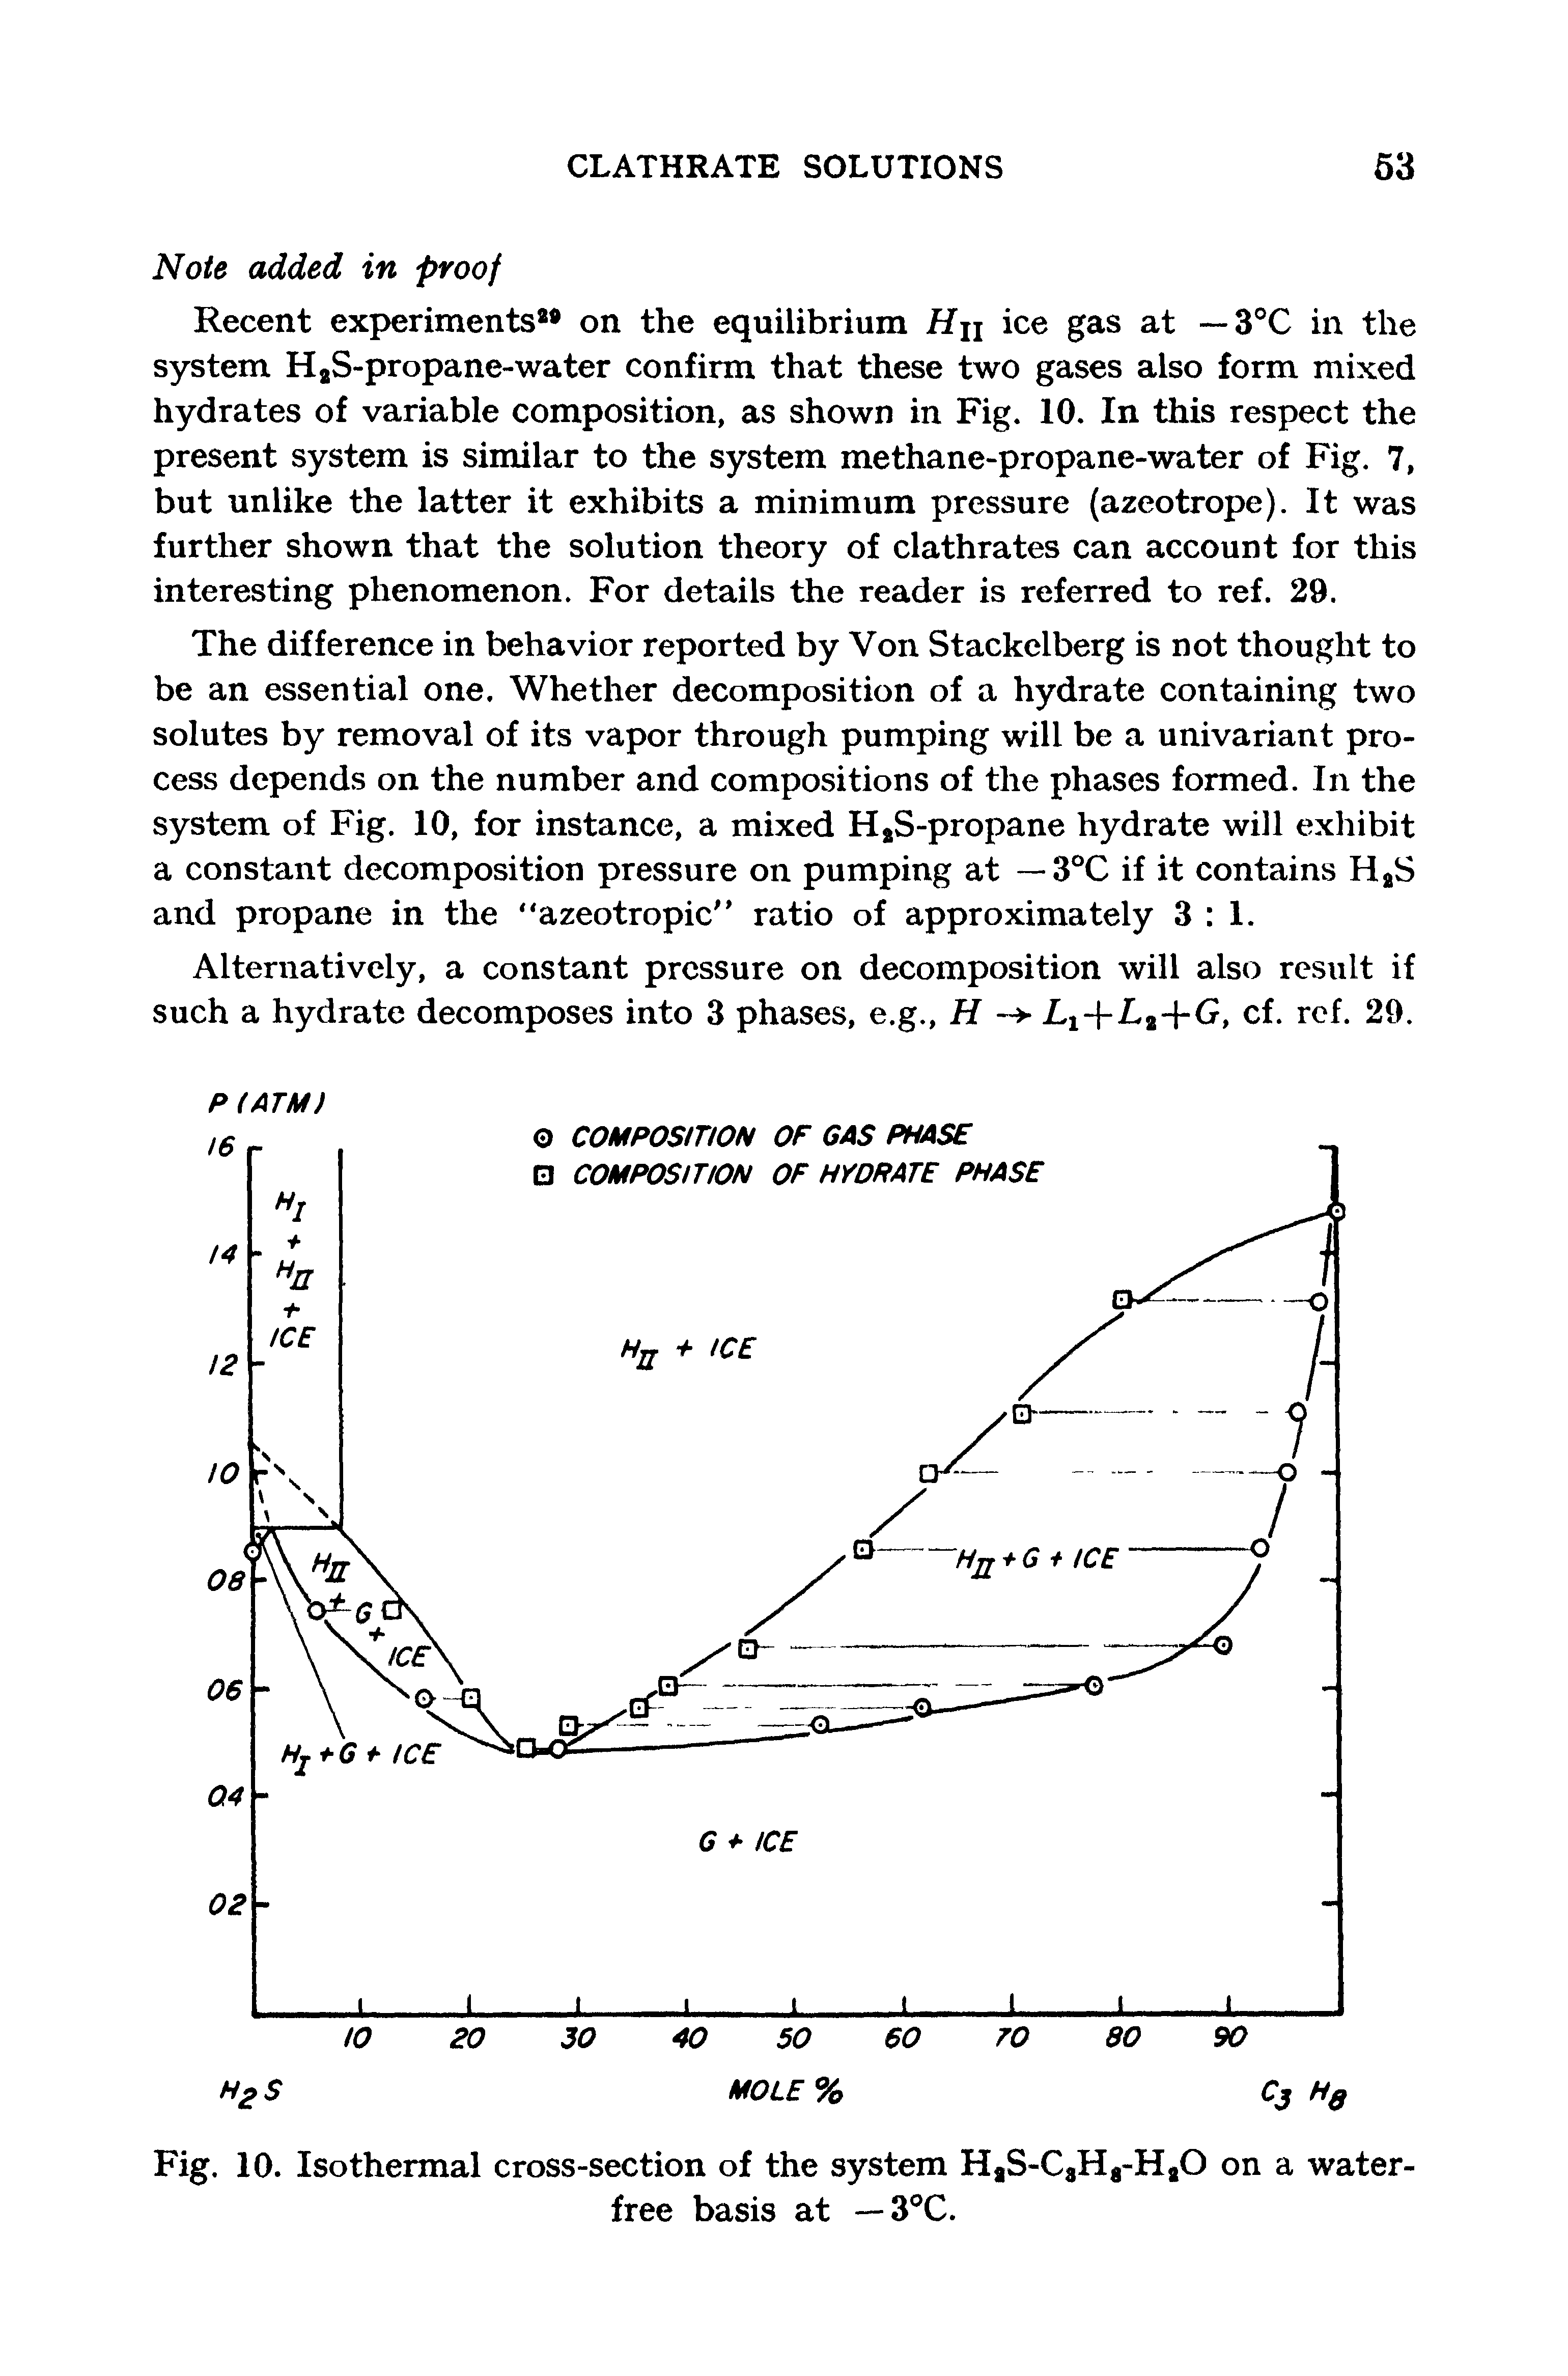 Fig. 10. Isothermal cross-section of the system HaS-CaHg-HaO on a water-free basis at — 3°C.